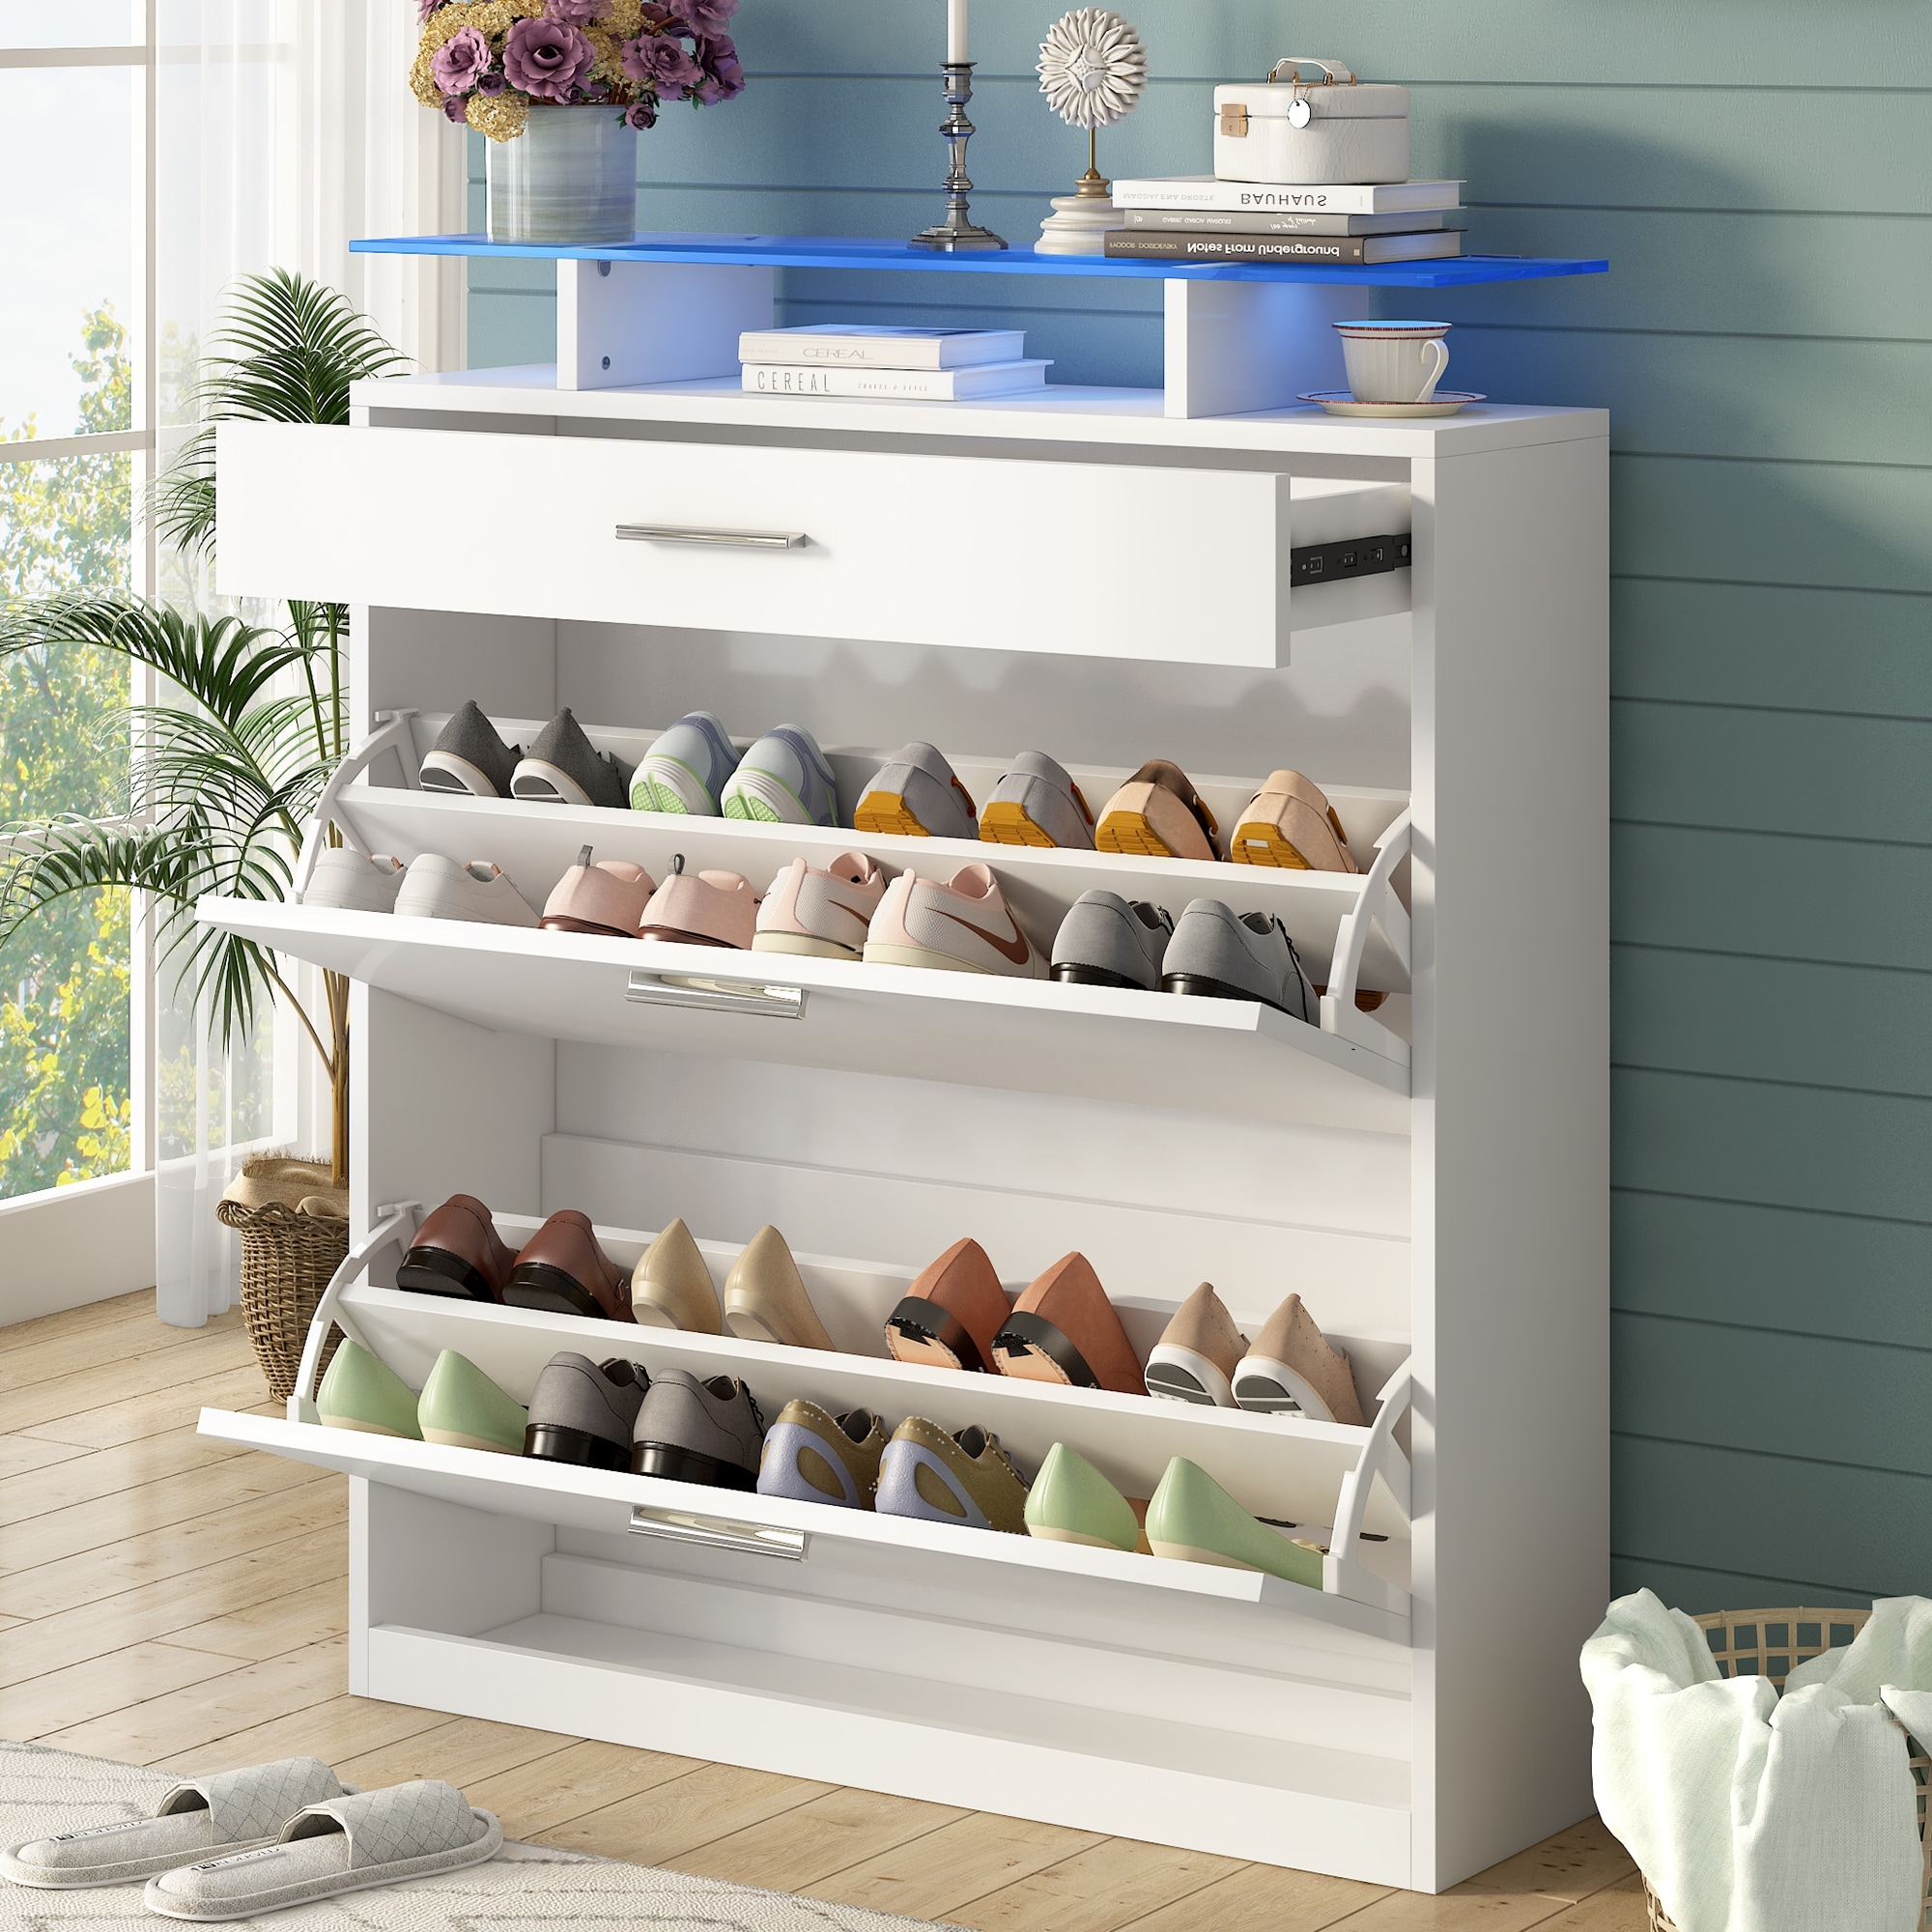 https://ak1.ostkcdn.com/images/products/is/images/direct/11cd1410323bb8c03473801b998e3163145d2e6d/Entryway-Shoes-Organizer-with-2-Flip-Drawers%2C-Free-Standing-Shoe-Rack-Shoes-Cabinet-with-LED-Light-for-Hallway.jpg